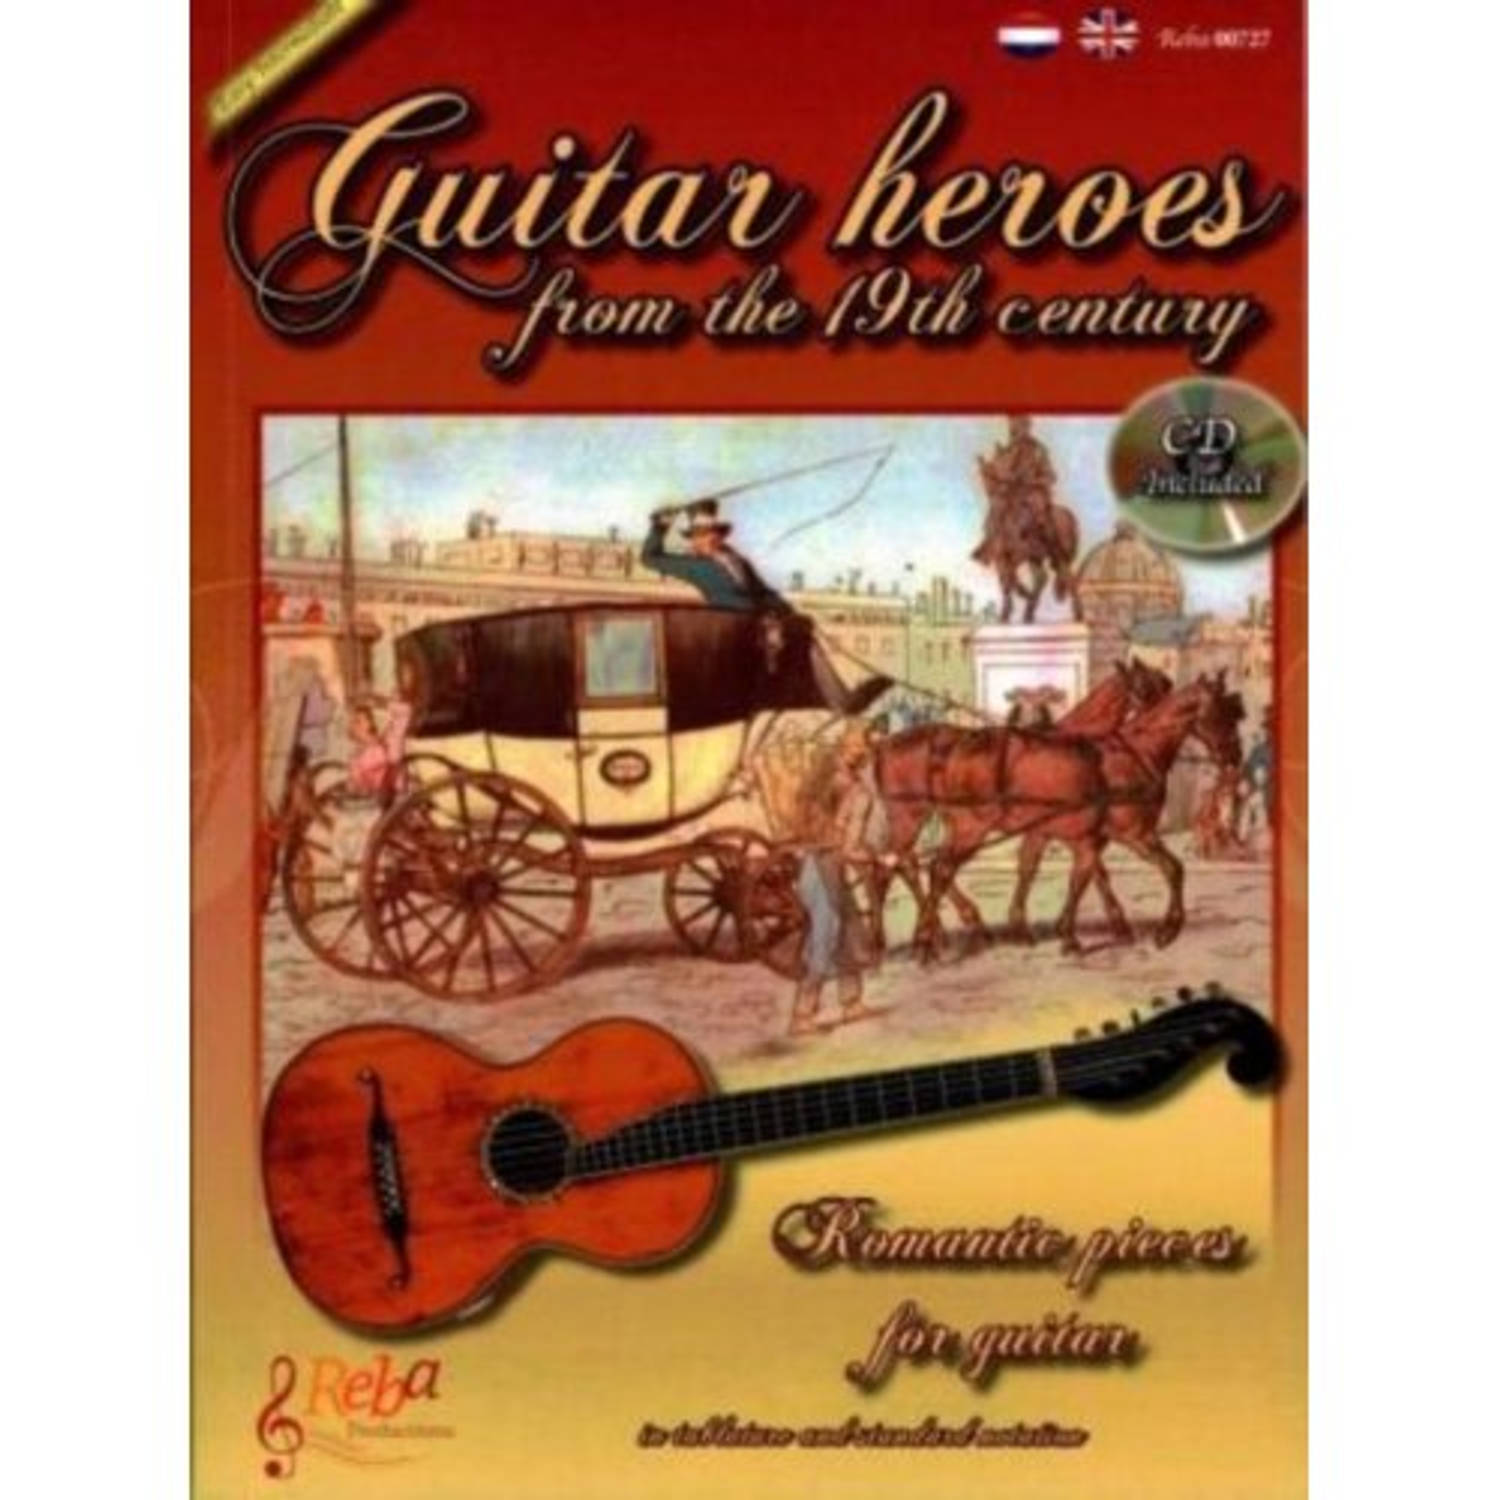 Guitar heroes of the 19th century